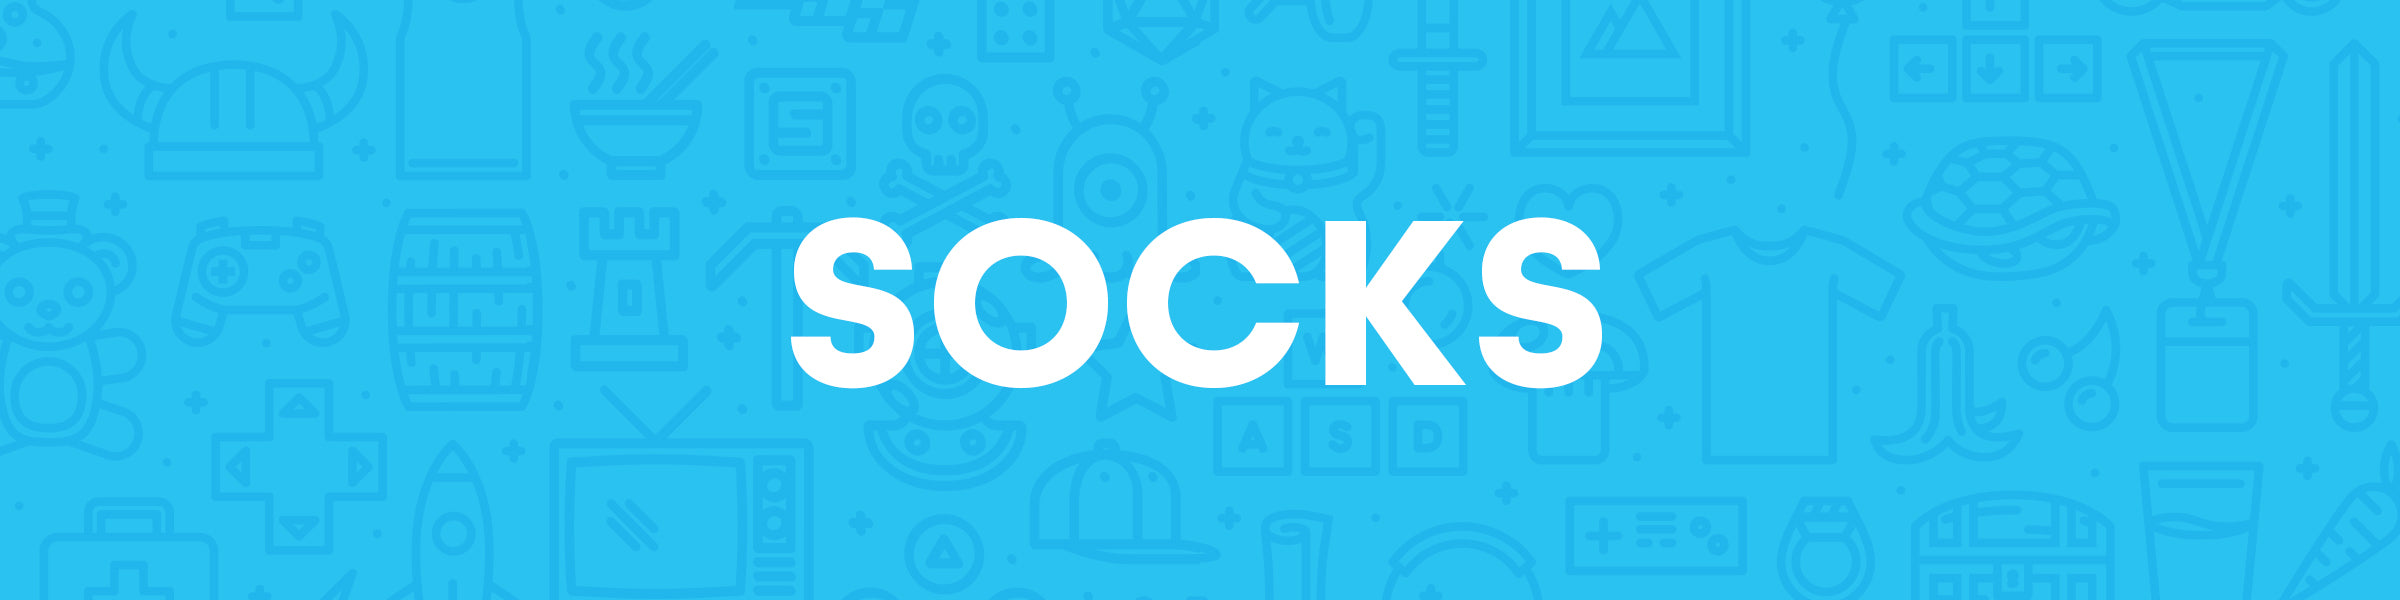 Officially Licensed and Original Socks by Sanshee